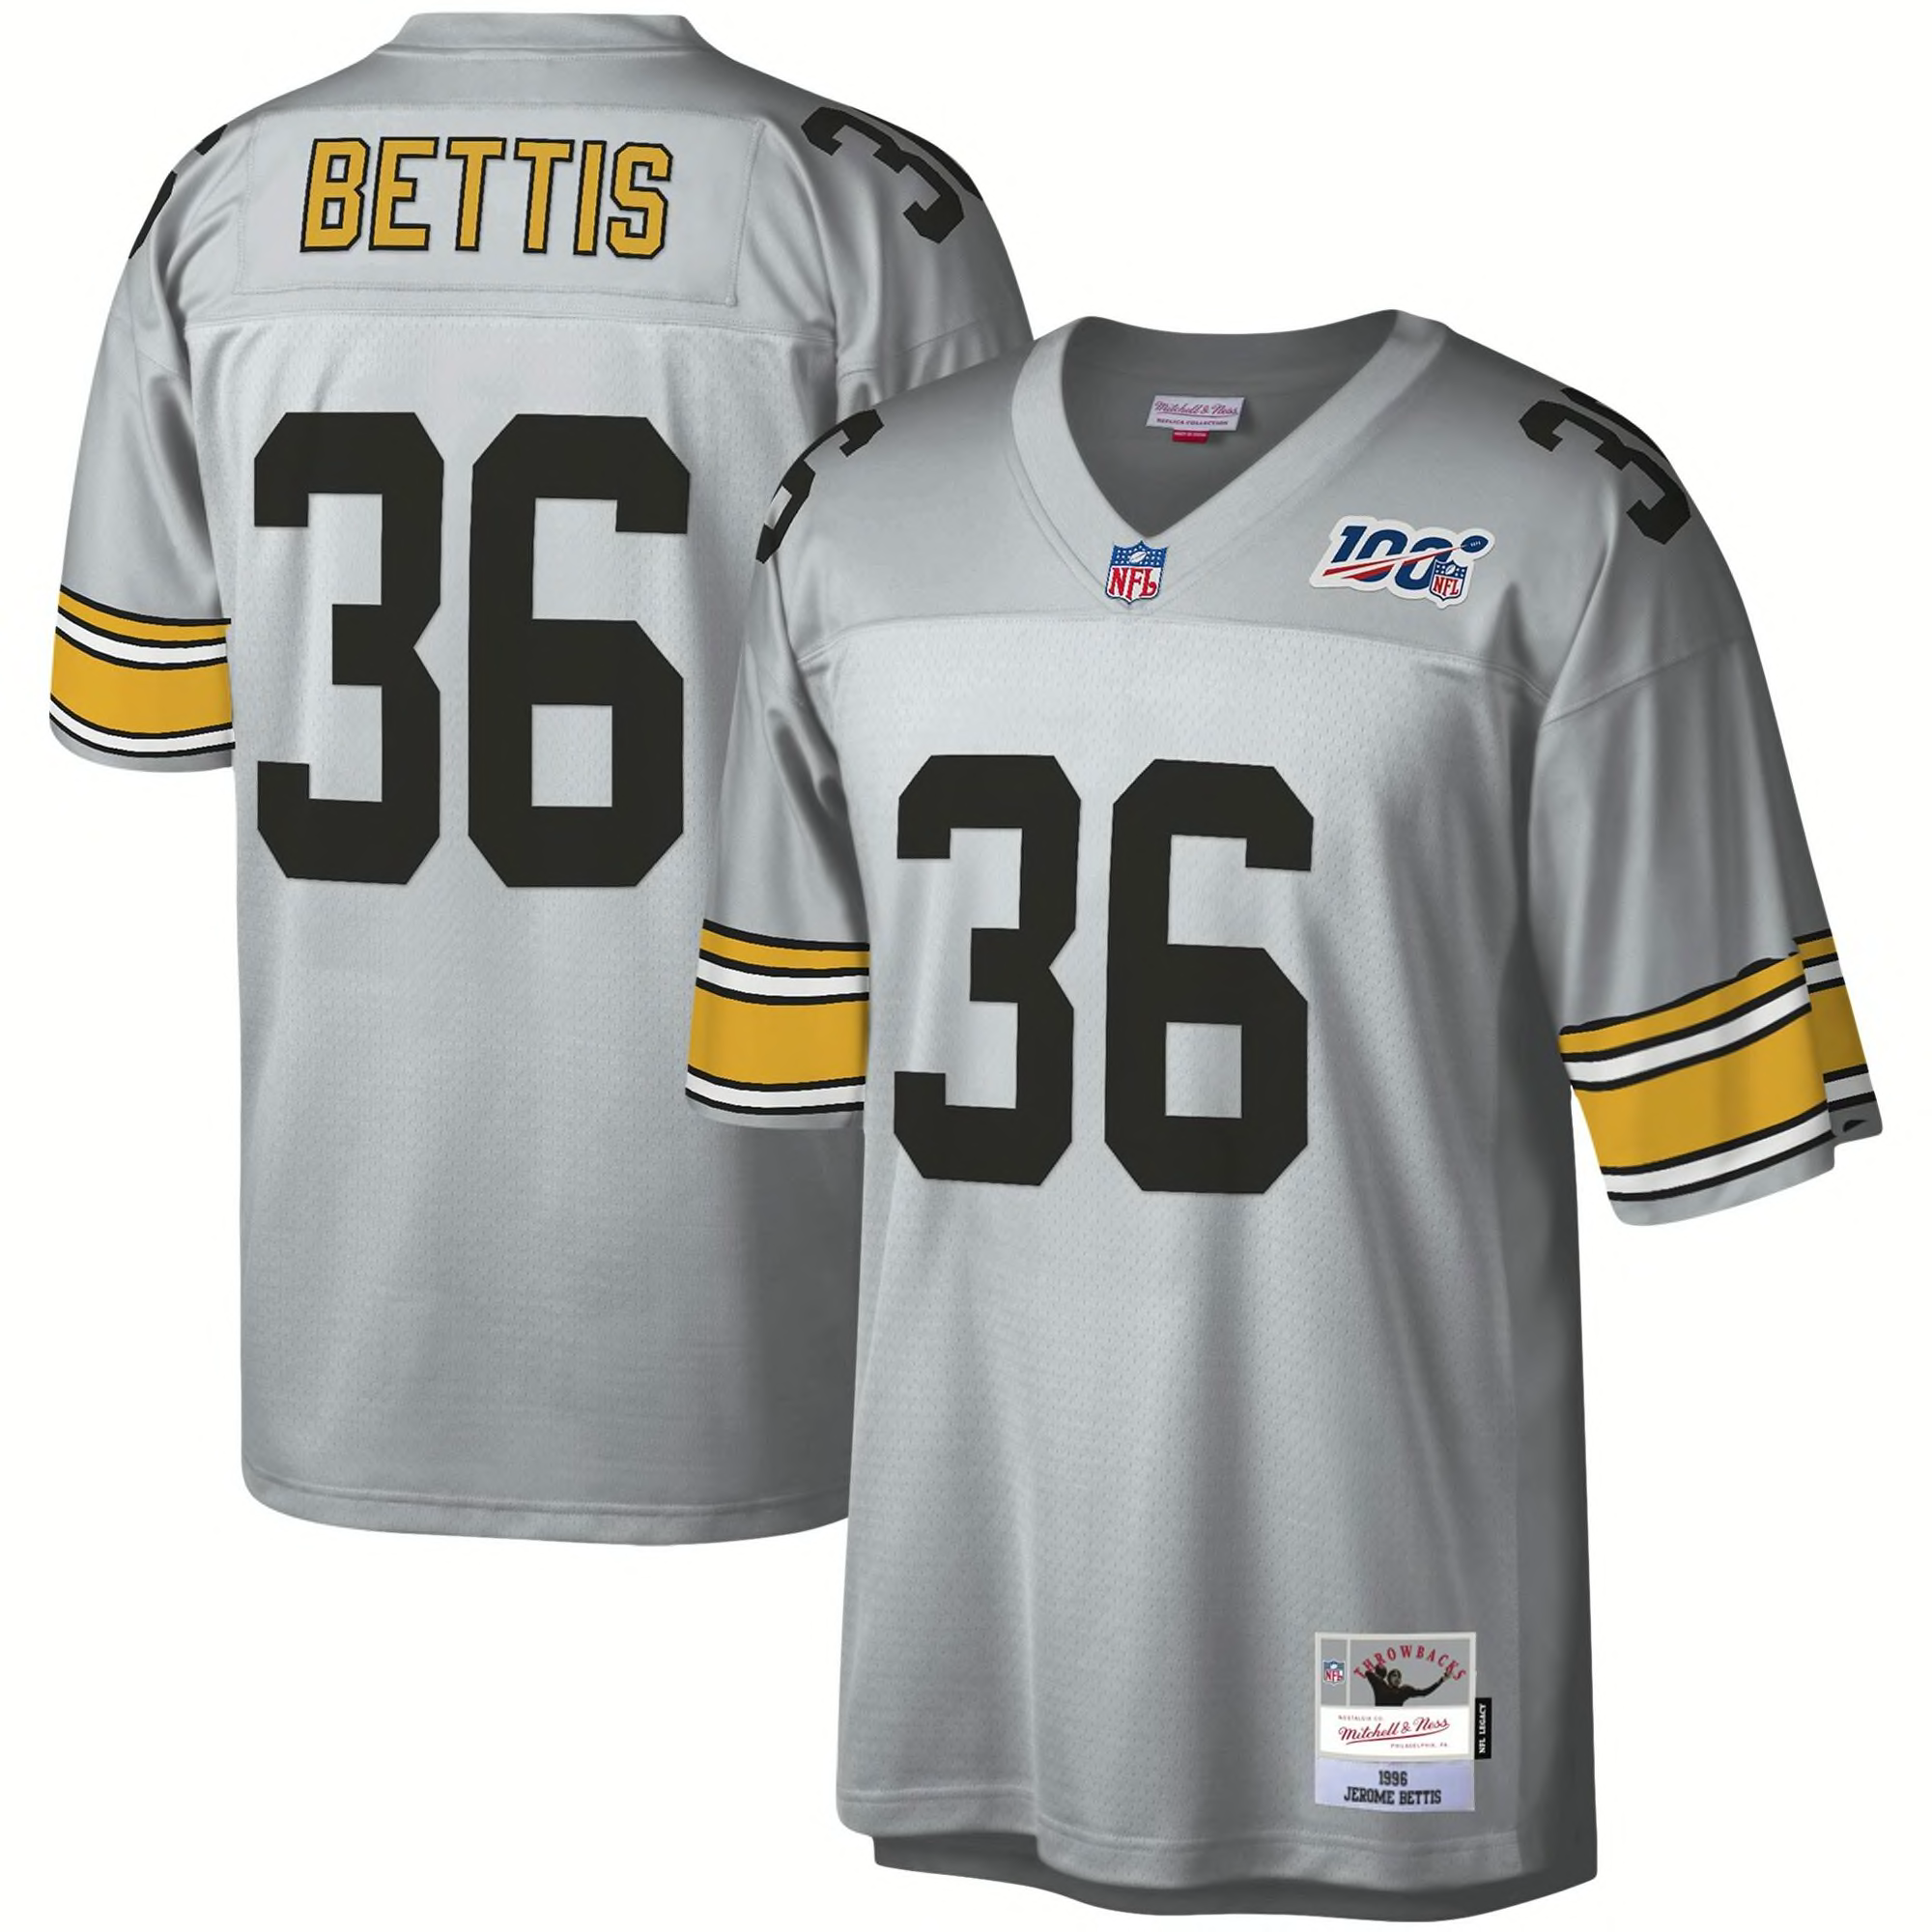 The 8 coolest Pittsburgh Steelers jerseys you can get right now